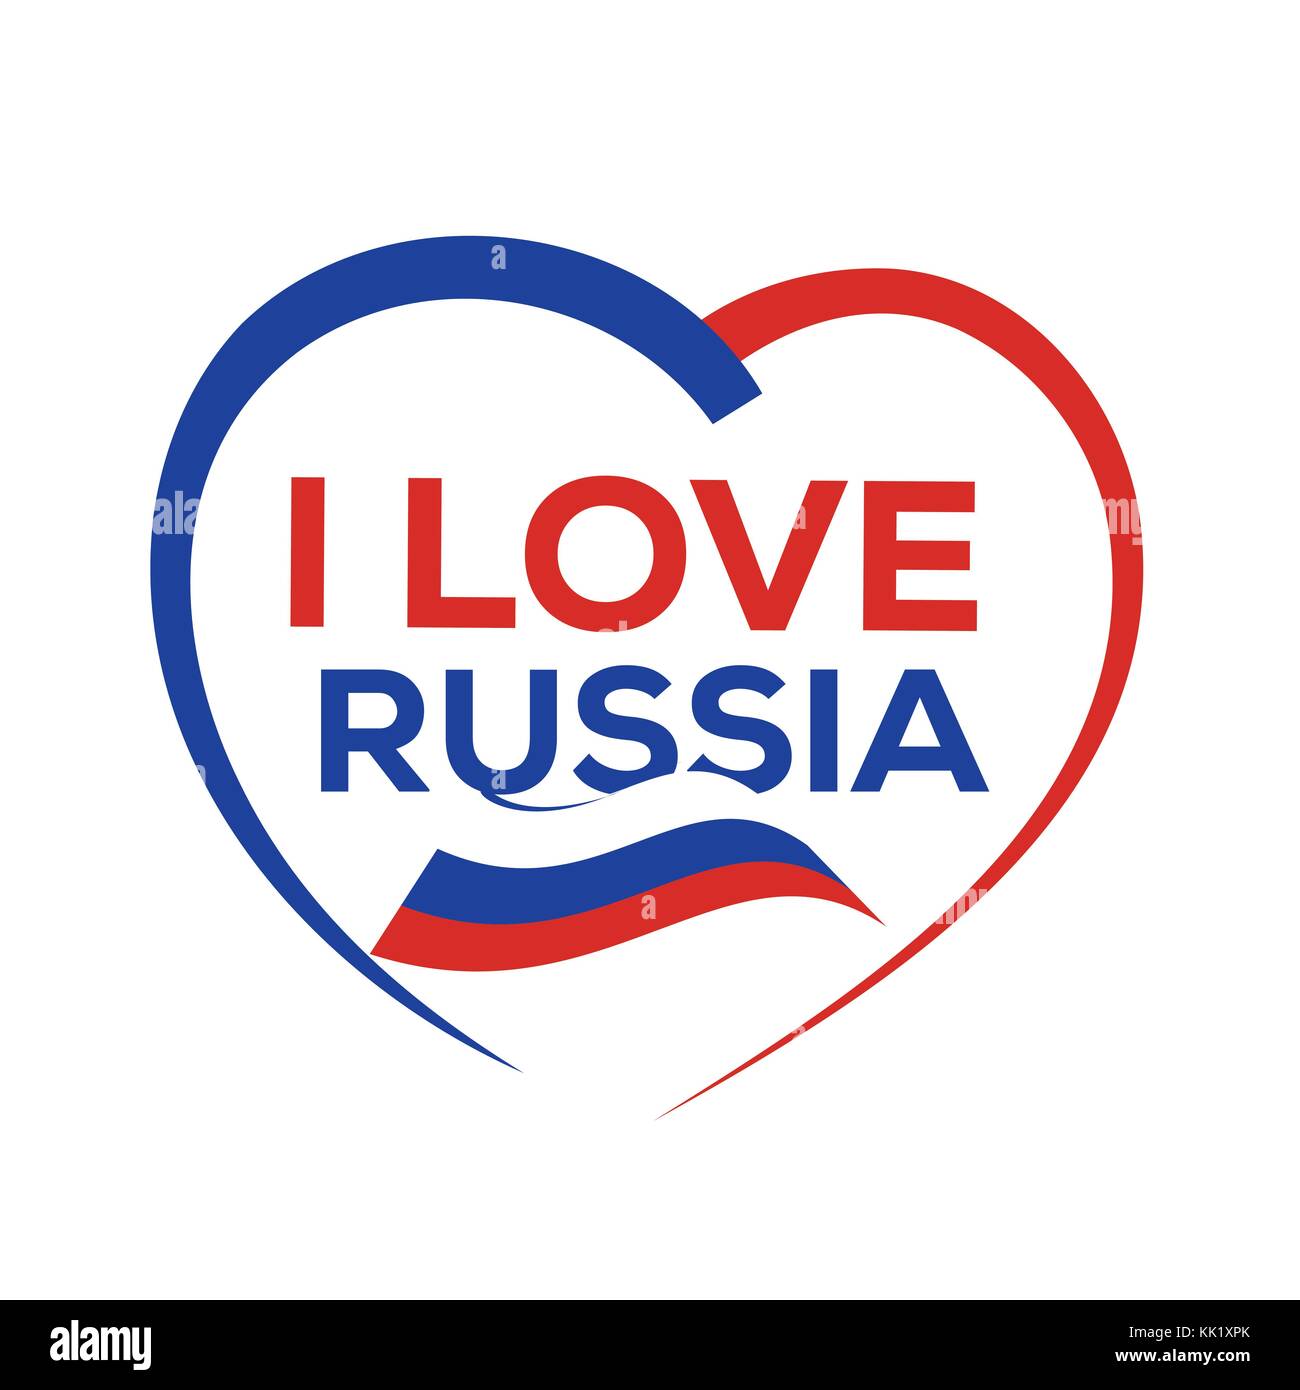 I love russia with outline of heart and russian flag, icon design, isolated on white background. Stock Vector